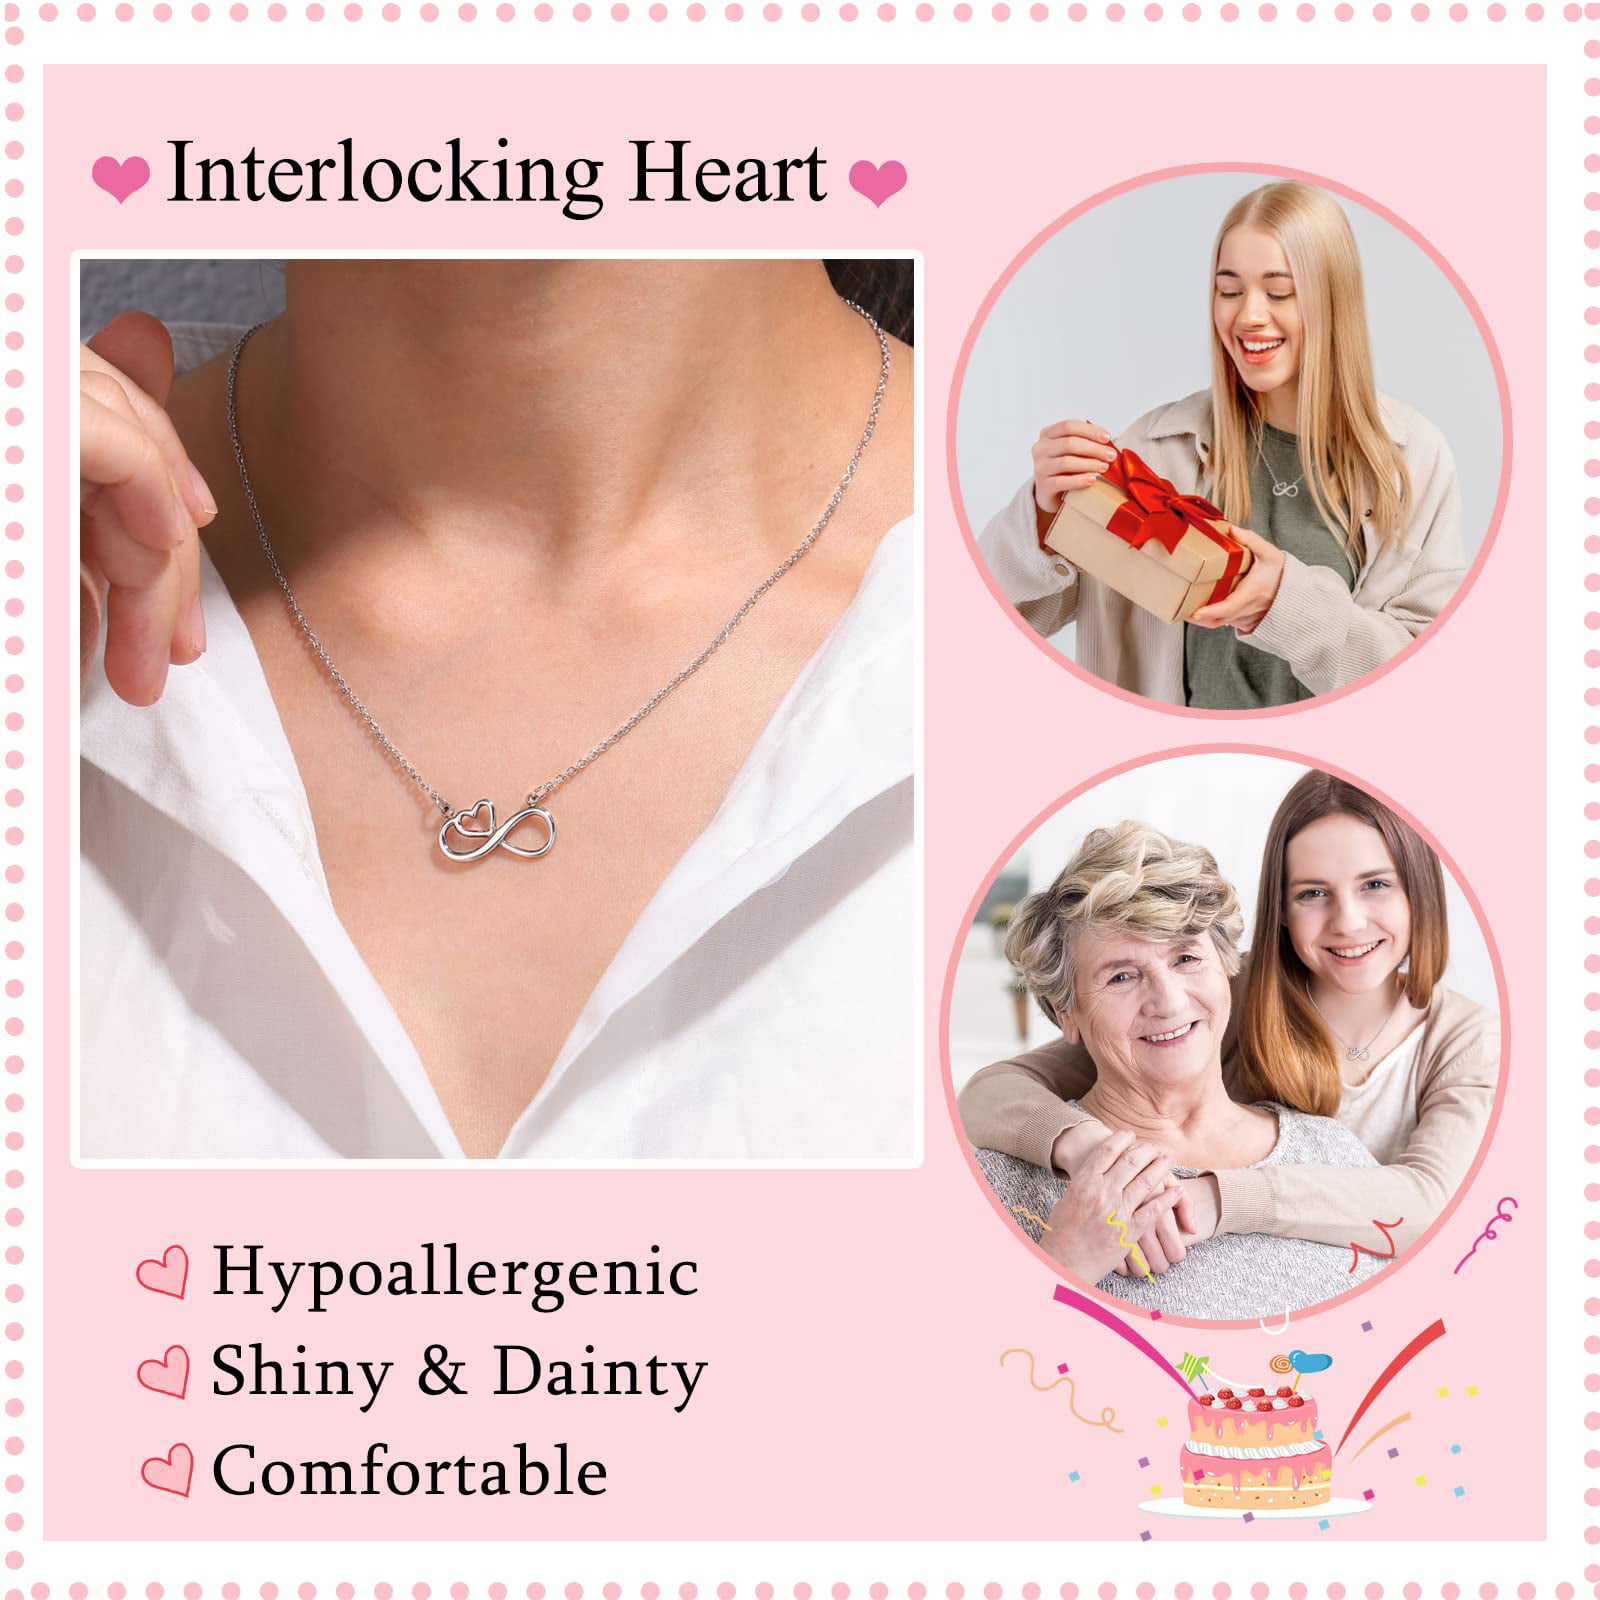 AURGTTCG Initial Necklaces for Teen Girls, Infinity Pendant letter